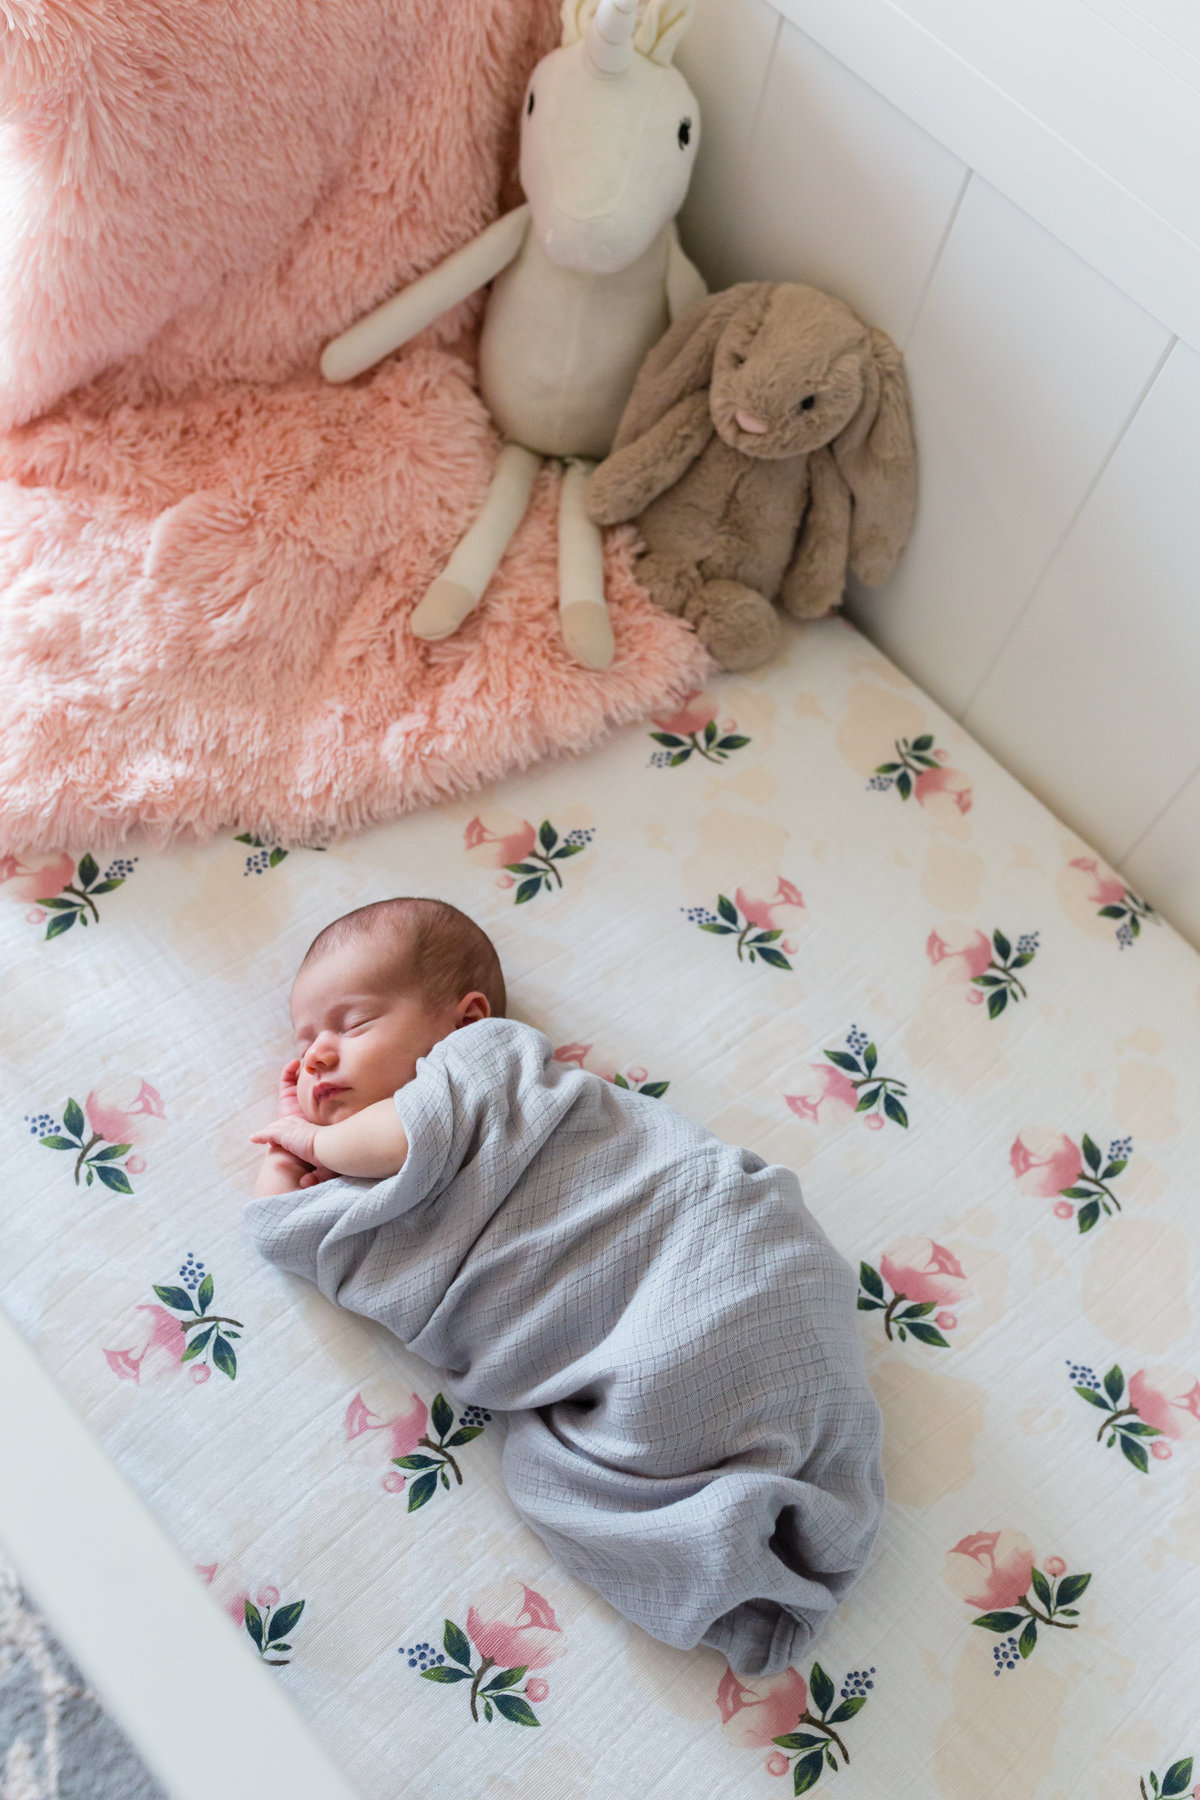 Baby in crib with stuffed animals - Jen Madigan - Naperville Lifestyle Newborn Photography